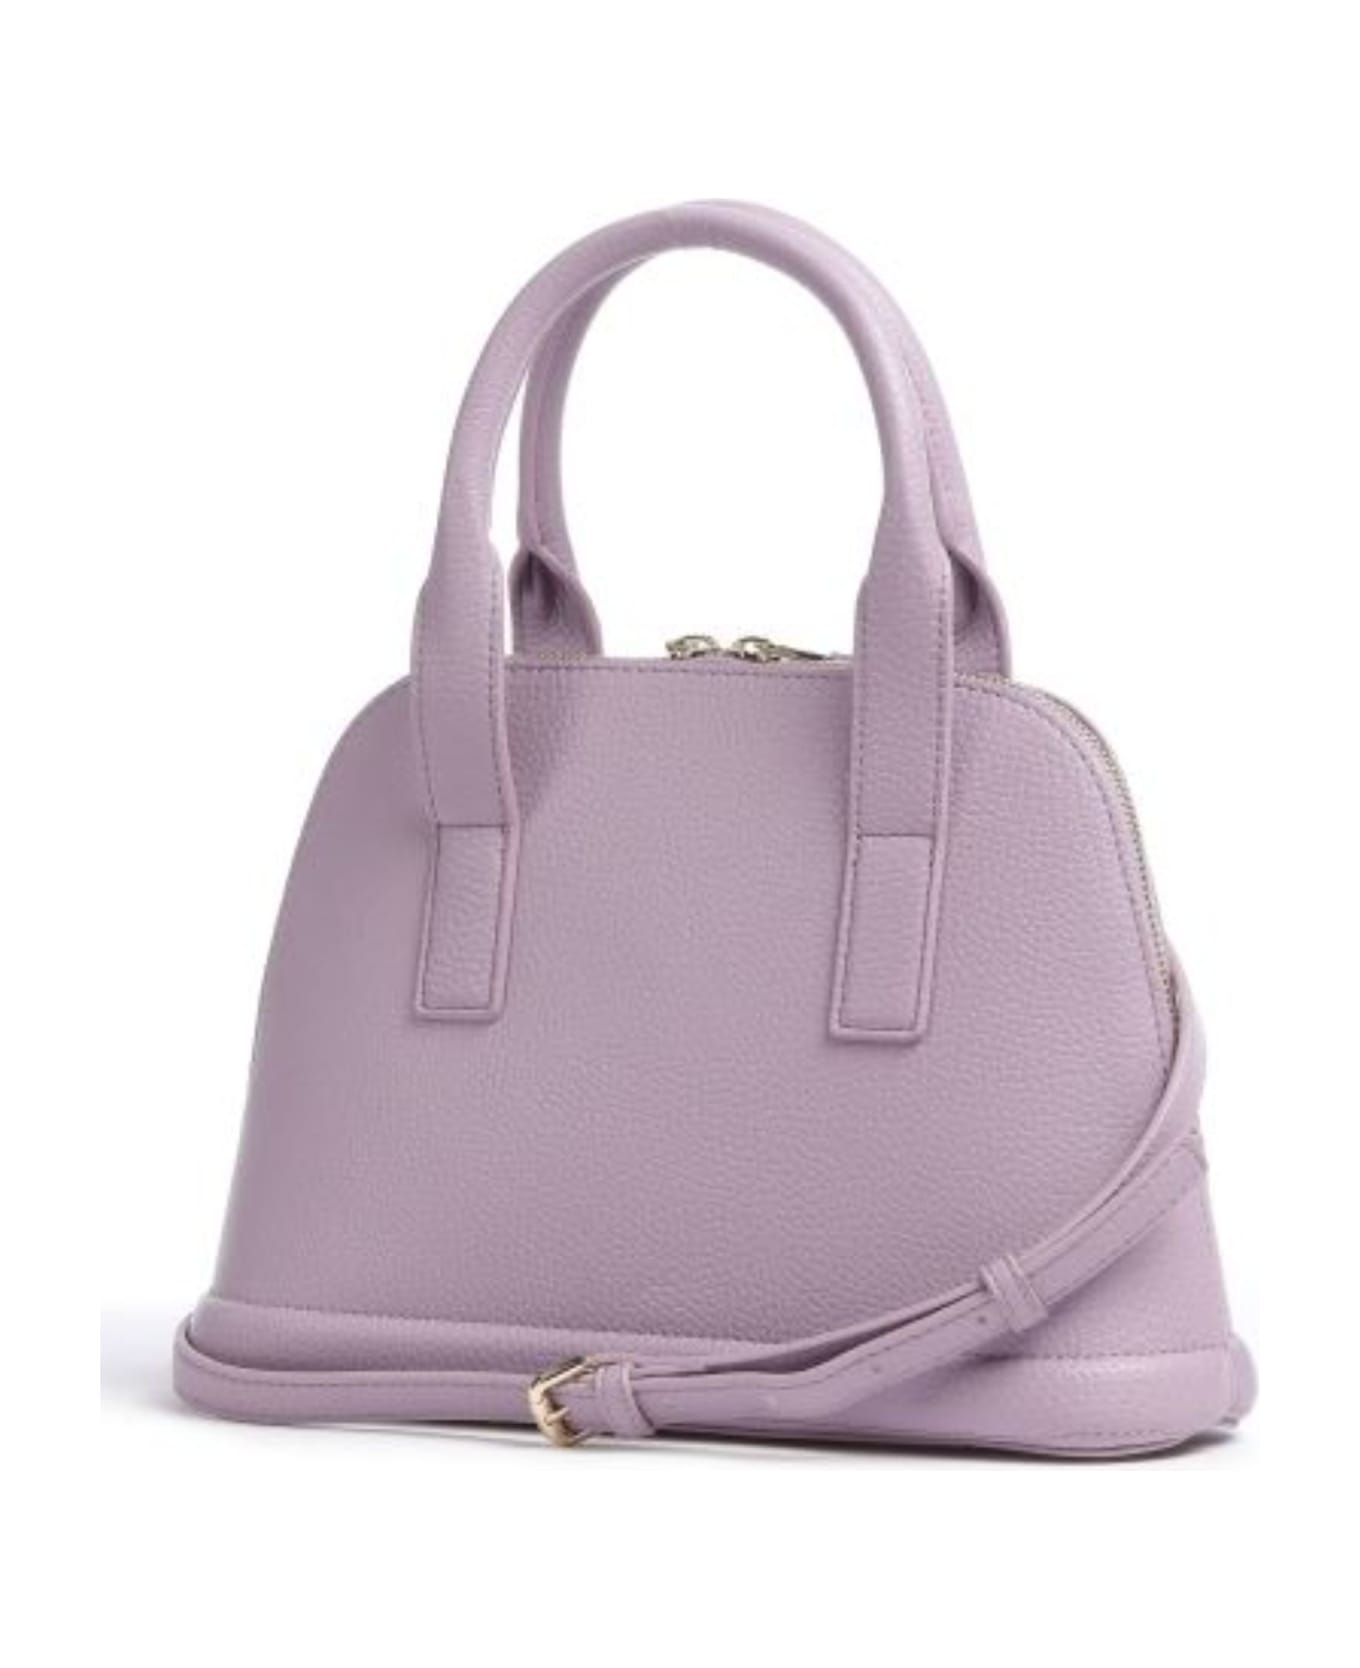 Versace Jeans Couture Bag - PURPLE トートバッグ